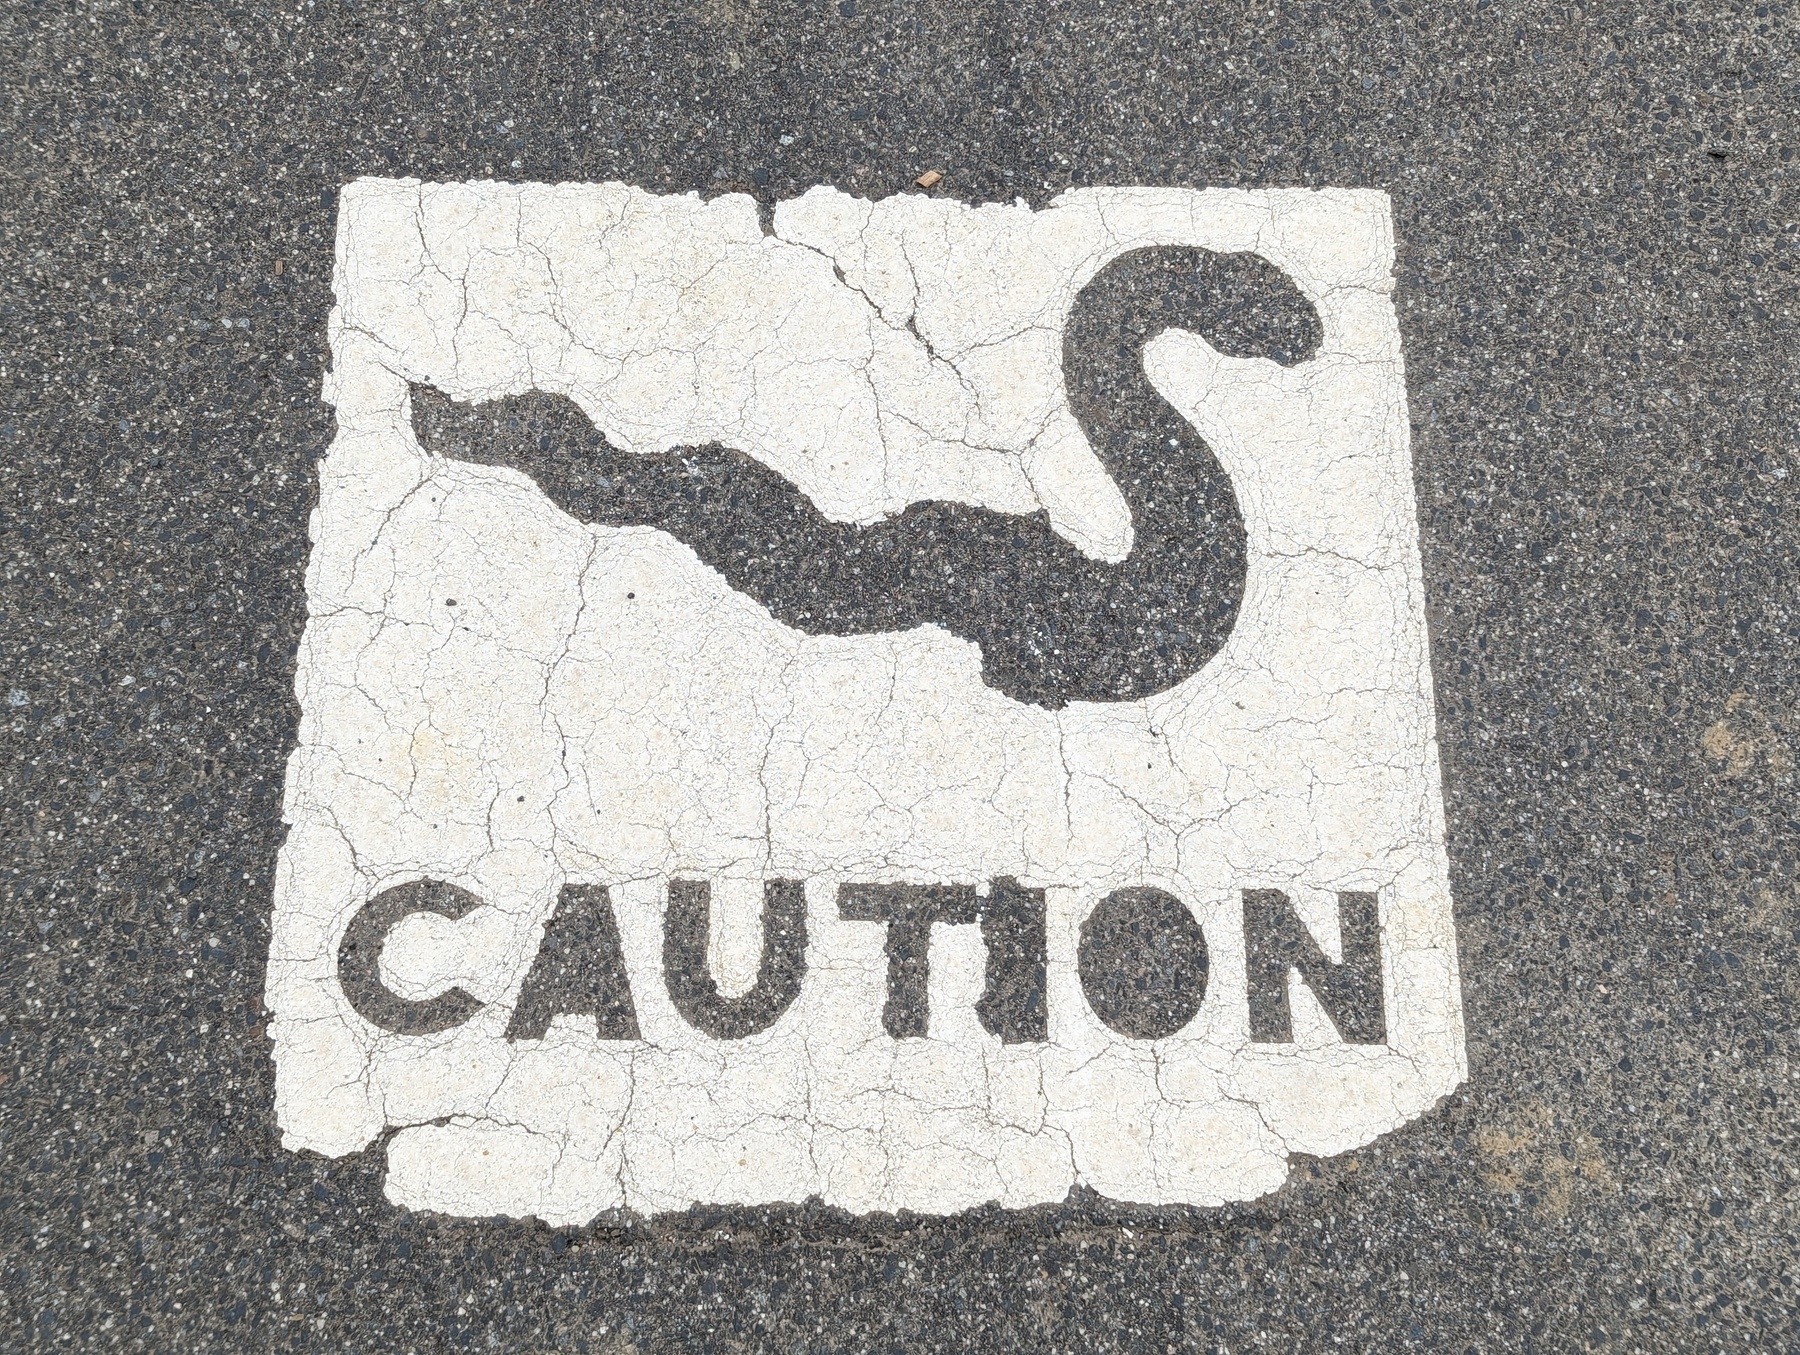 A white glyph painted on an asphalt path depicting a snake and the word 'Caution' underneath.